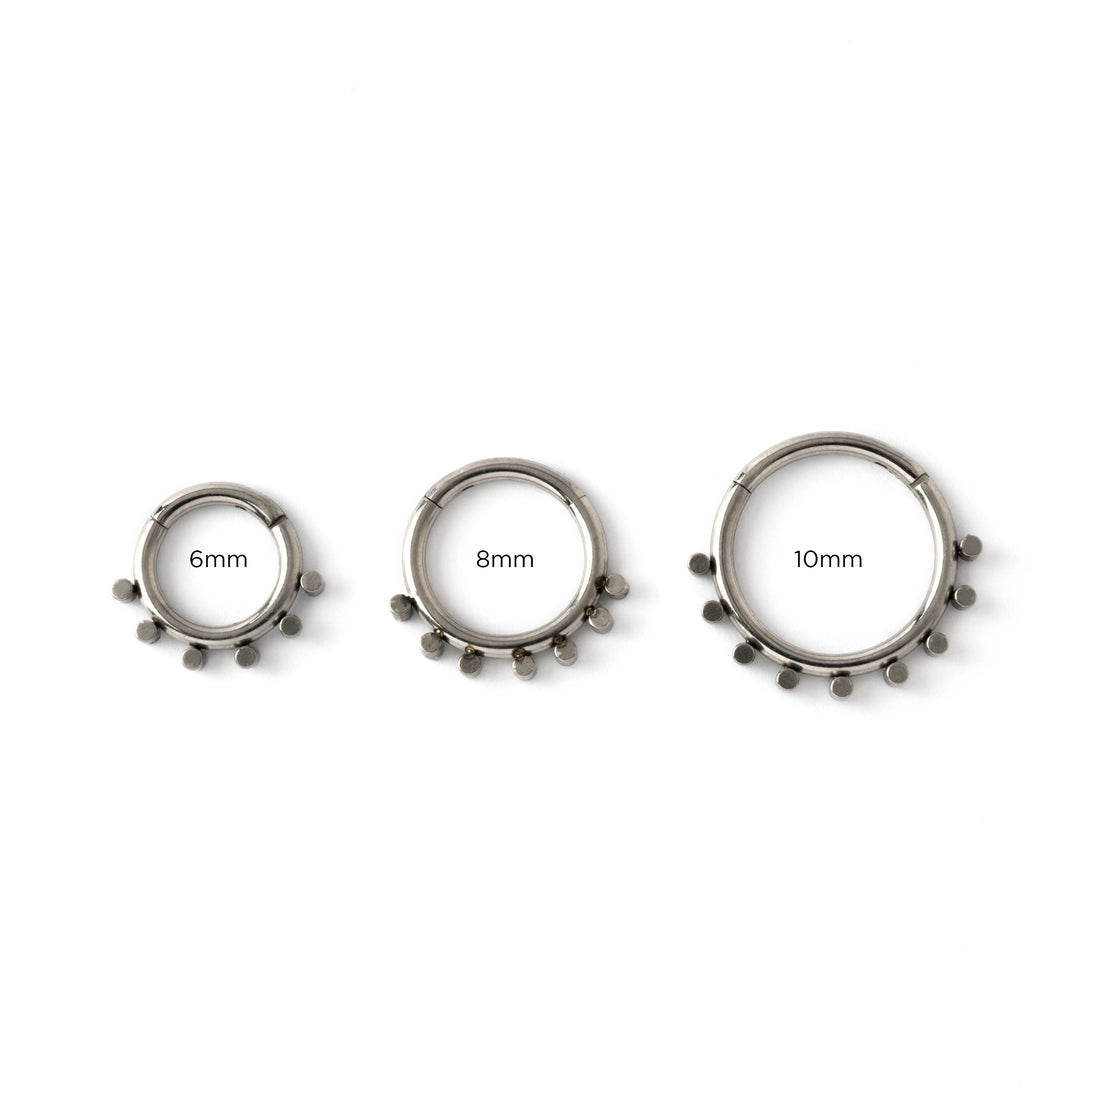 elegant and minimalist surgical steel piercing clicker ring with geometric spheres sizes 6mm, 8mm, 10mm